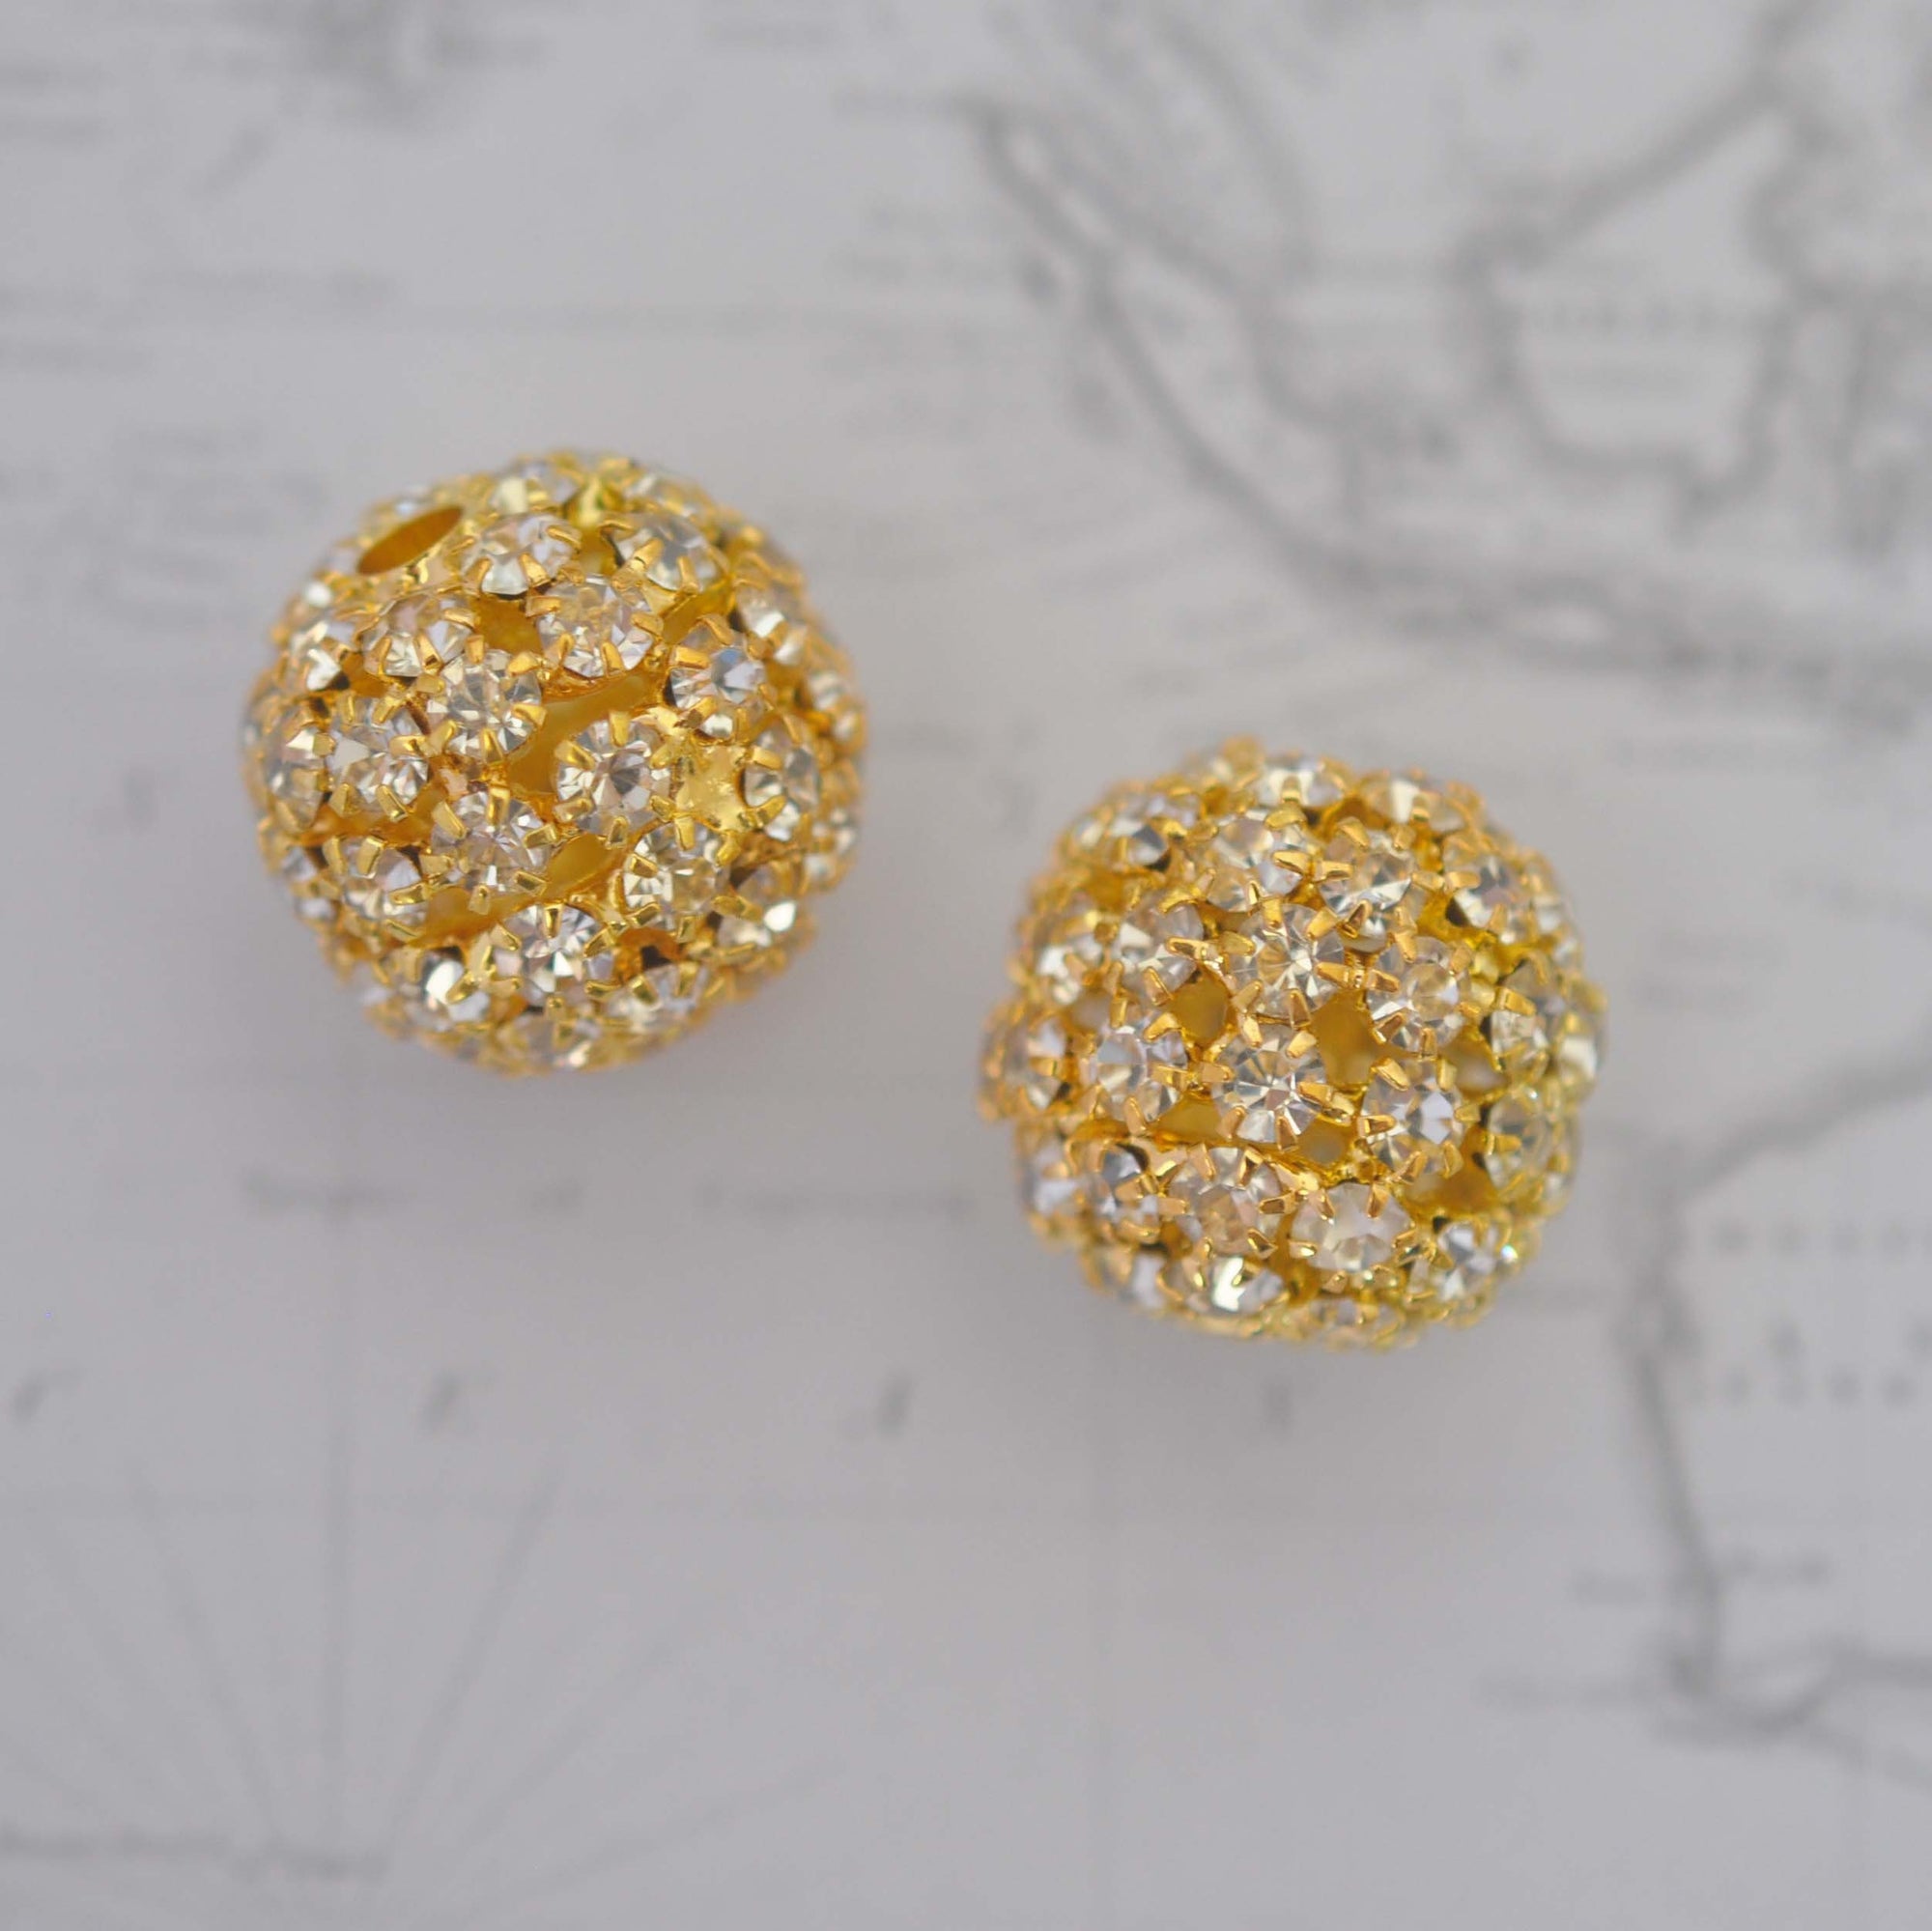 Large Gold Plated Rhinestone Bead Balls 18MM - Pair Of Bead Balls (2 Pieces)